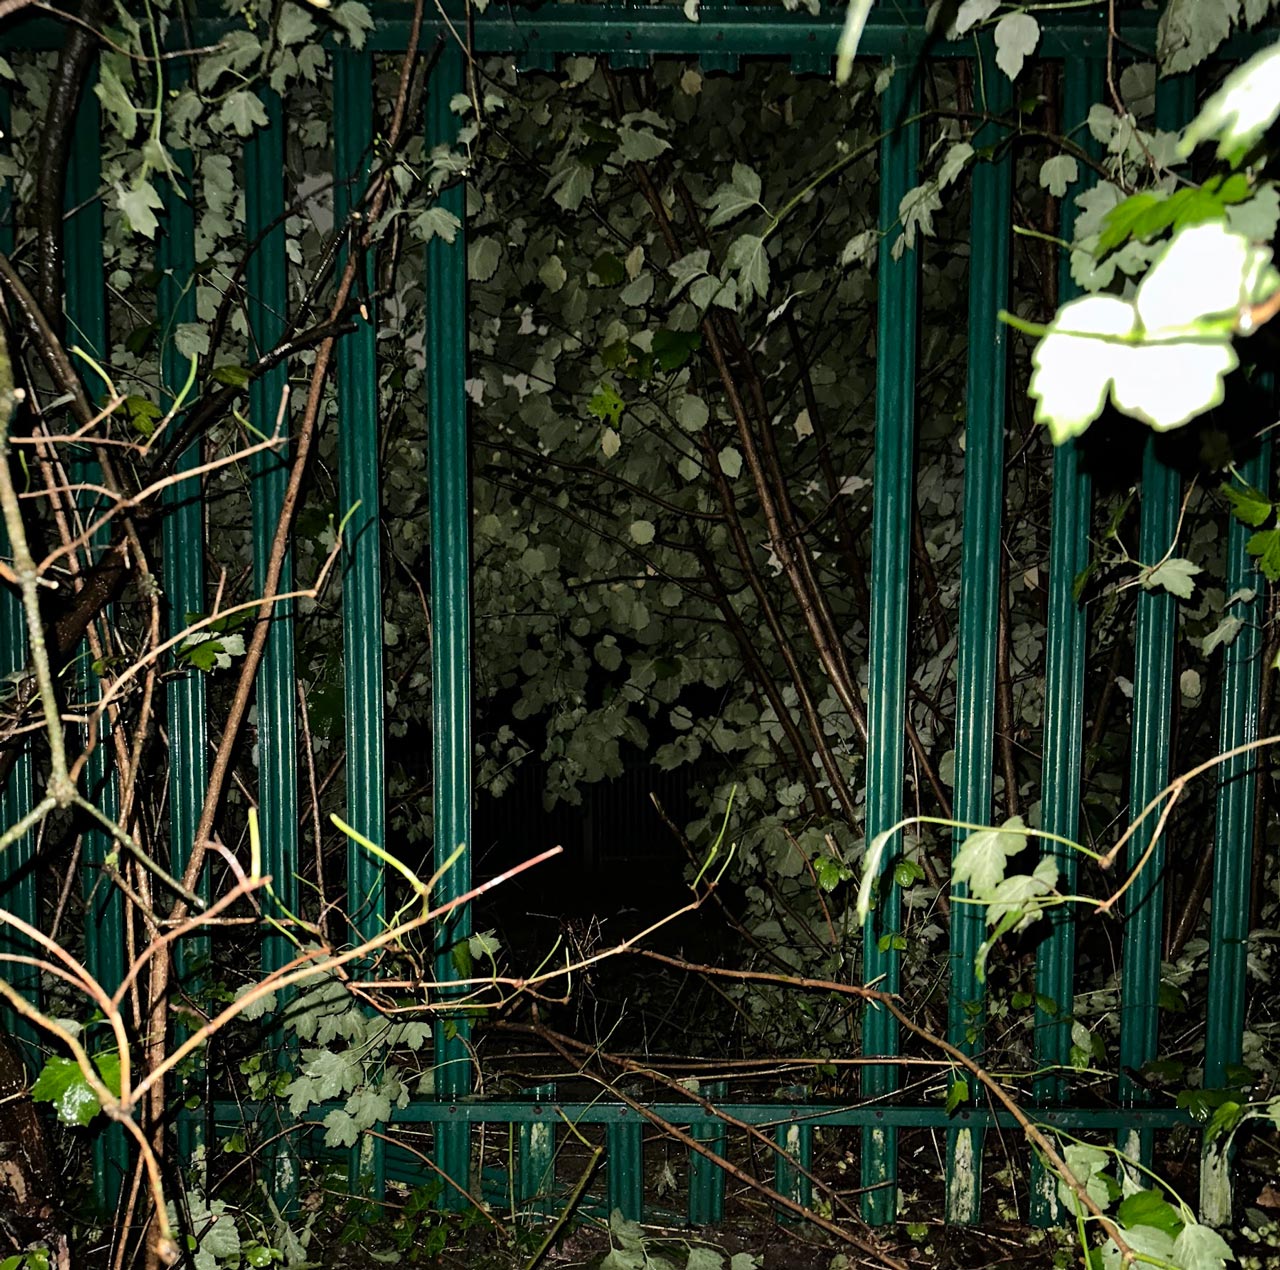 Metal green fencing, surrounded by greenery, has some of it spars cut to make an entrance and exit hole about the size of a crouched person.